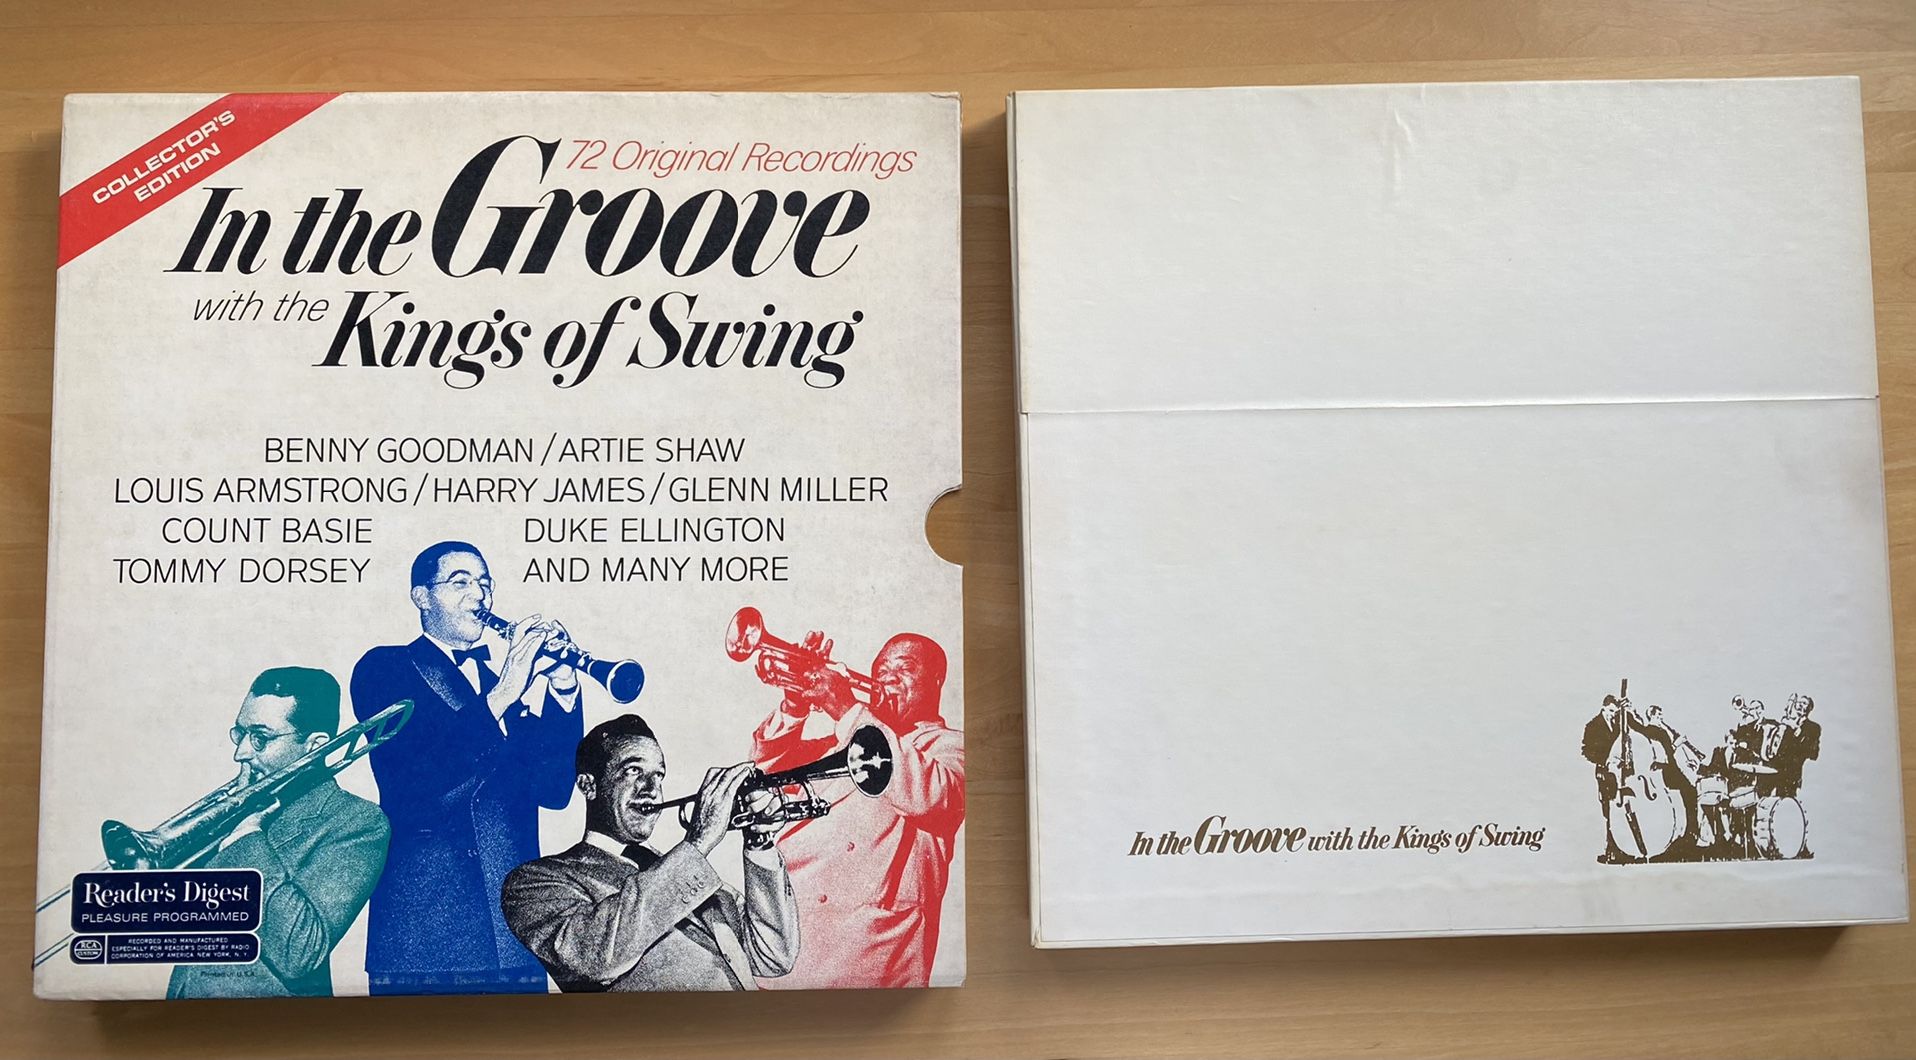 In the Groove with the Kings of Swing record set-72 original Recordings